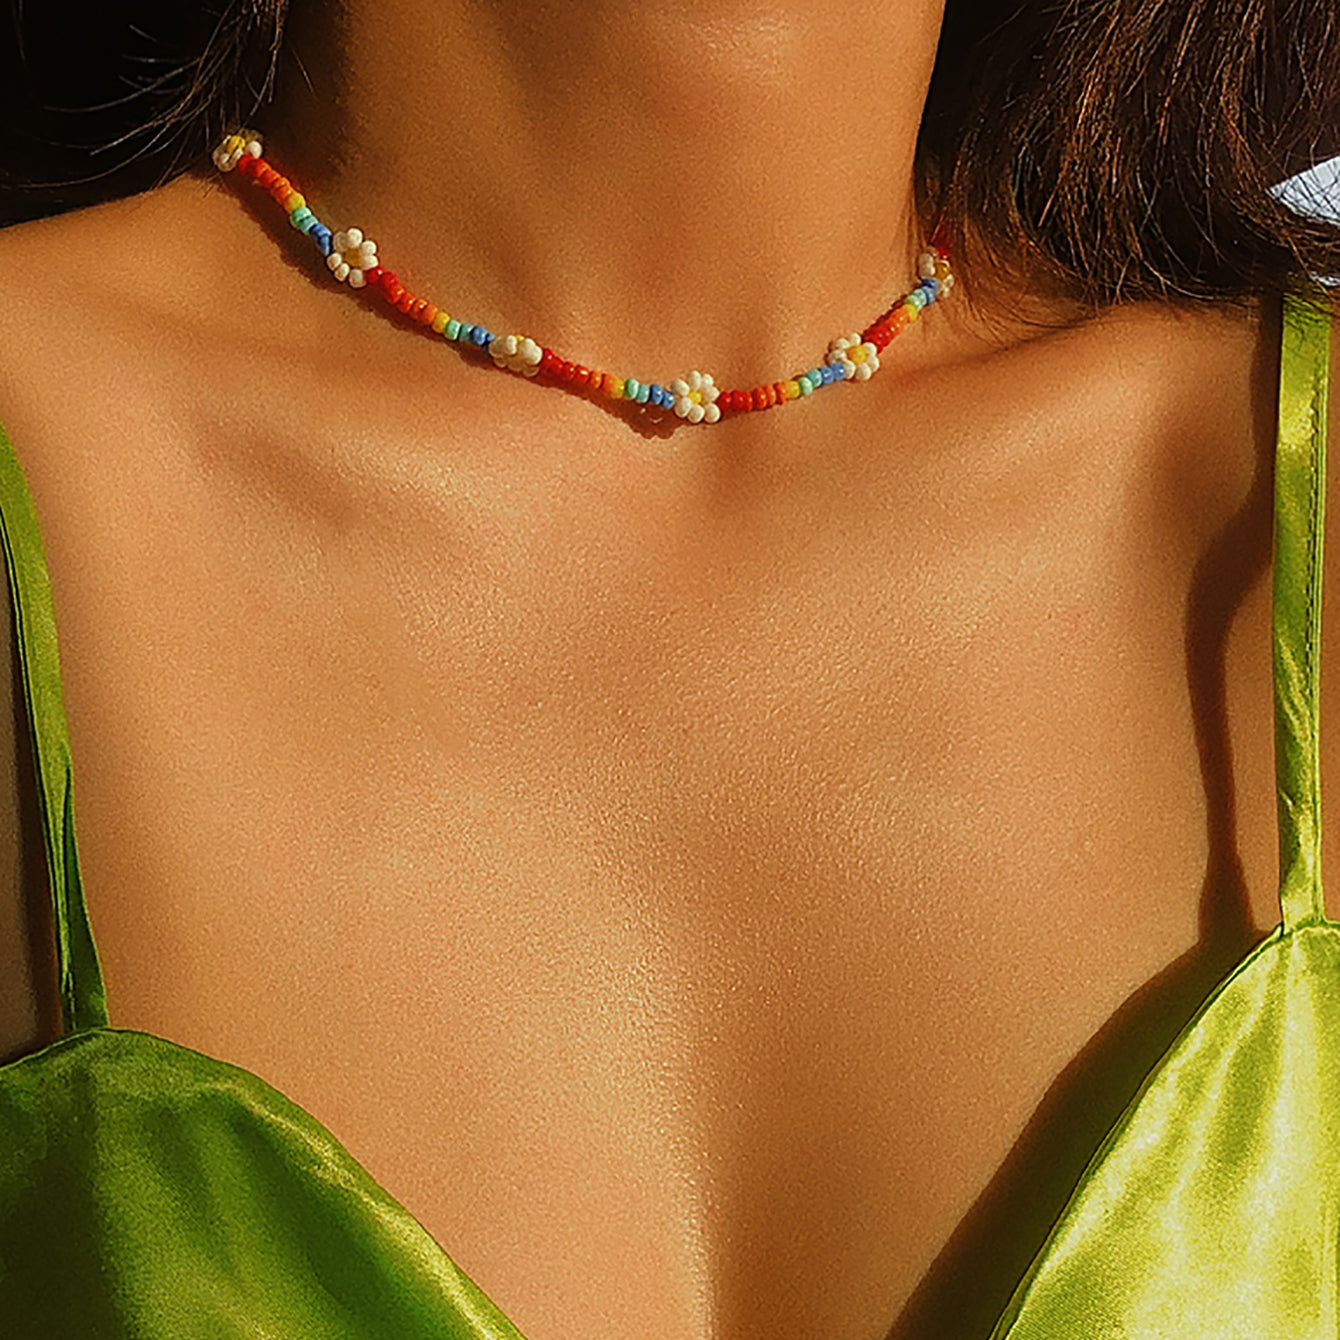 Gorgeous 1 Piece Ladies Multi-Colored Floral Beaded Necklace - Handmade with Love!